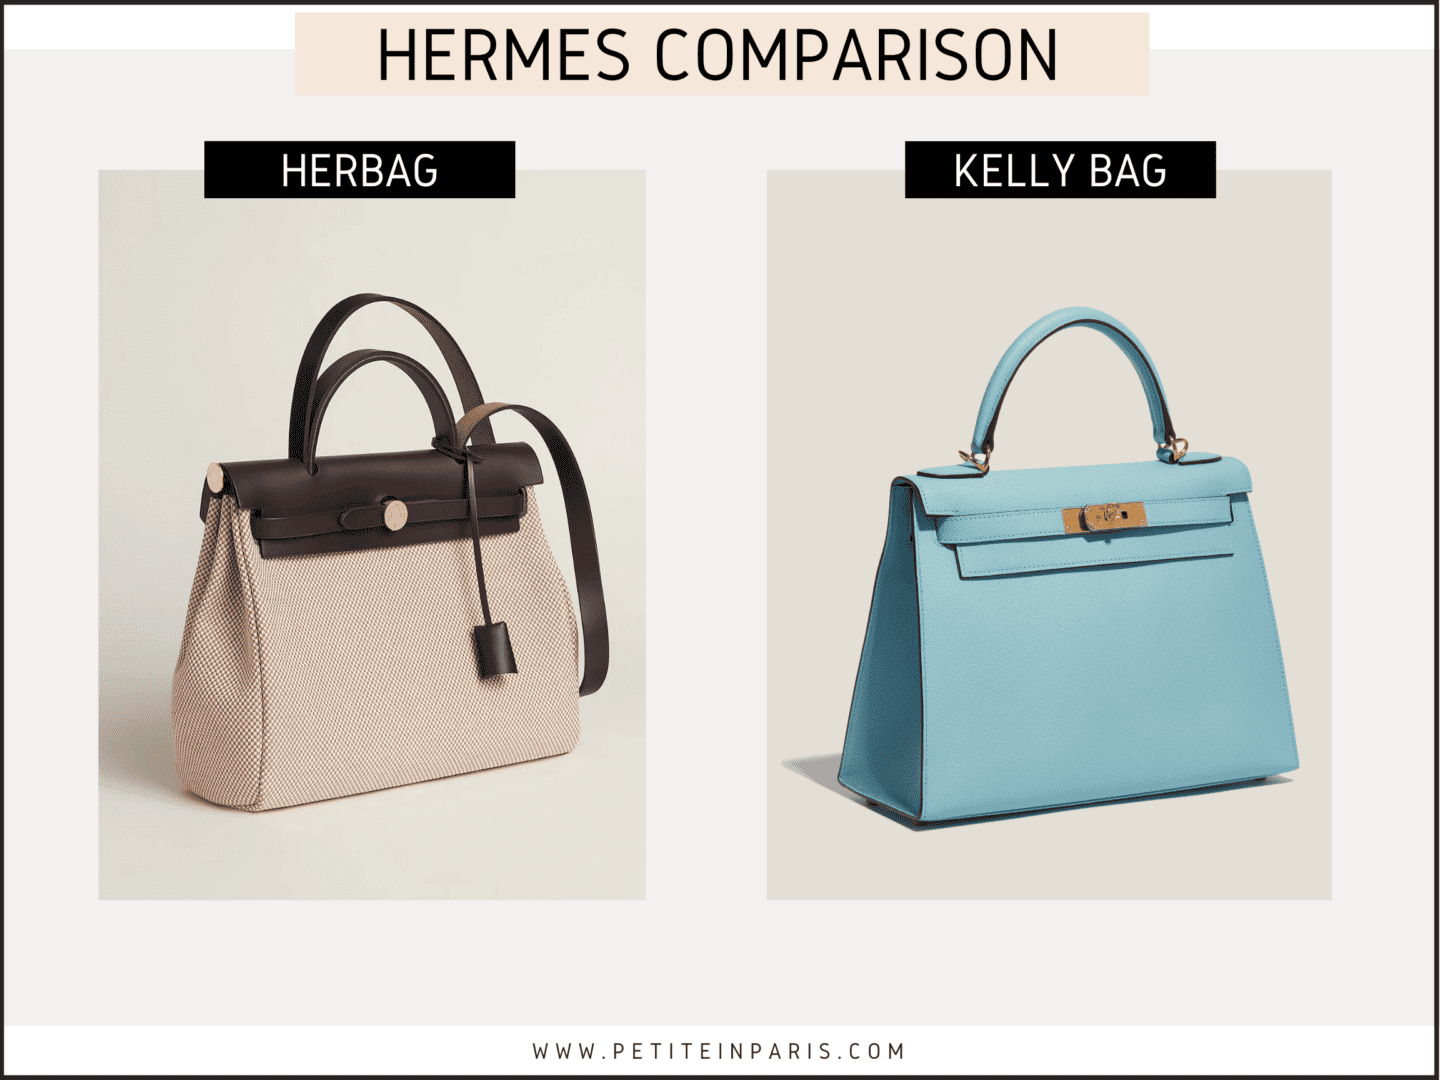 Herbag being compared to a Hermes Kelly Bag